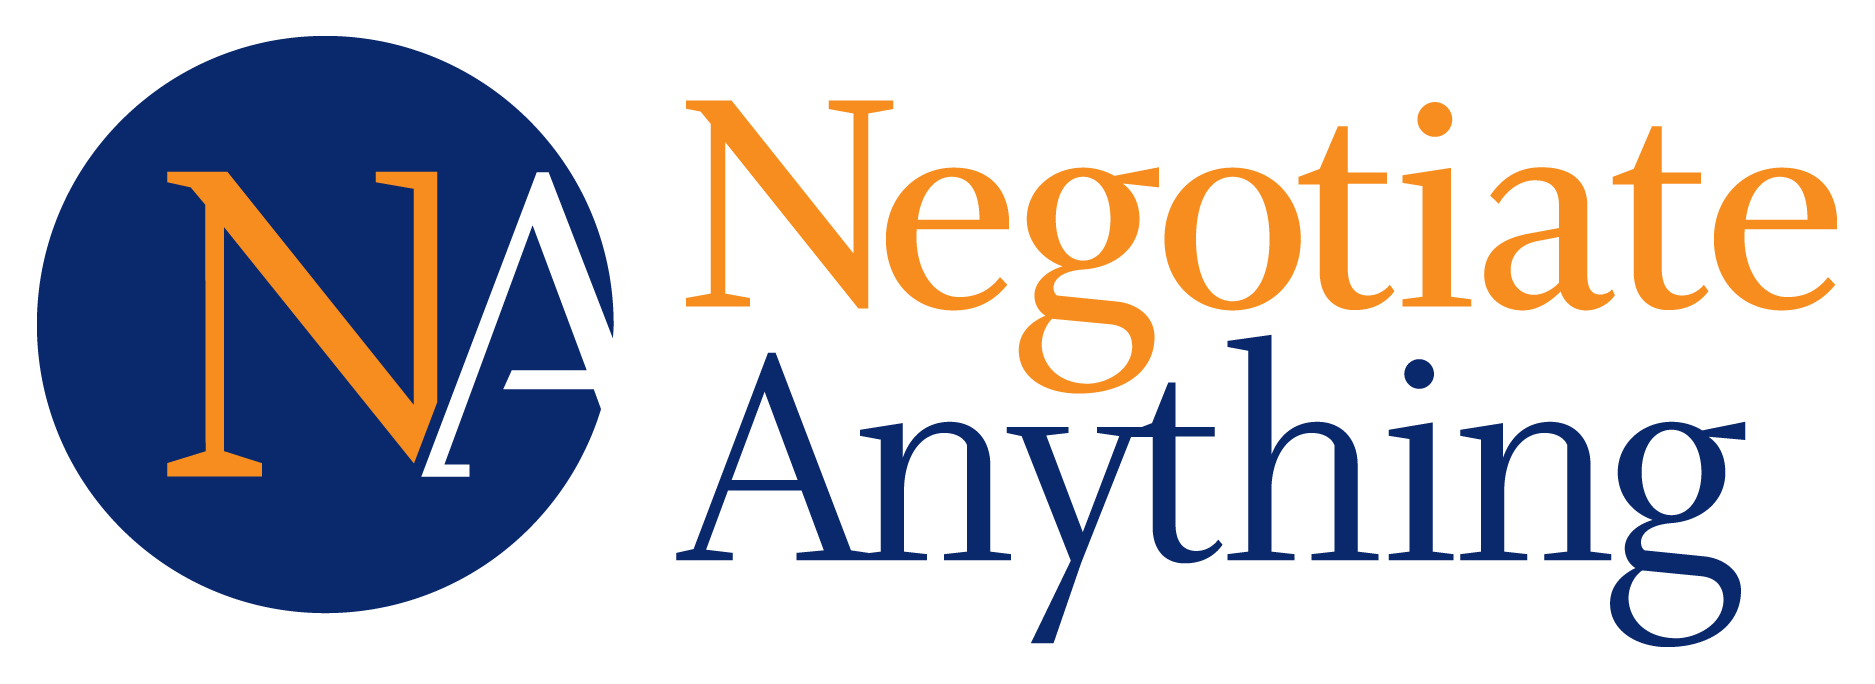 Negotiate_Anything_Logo.png